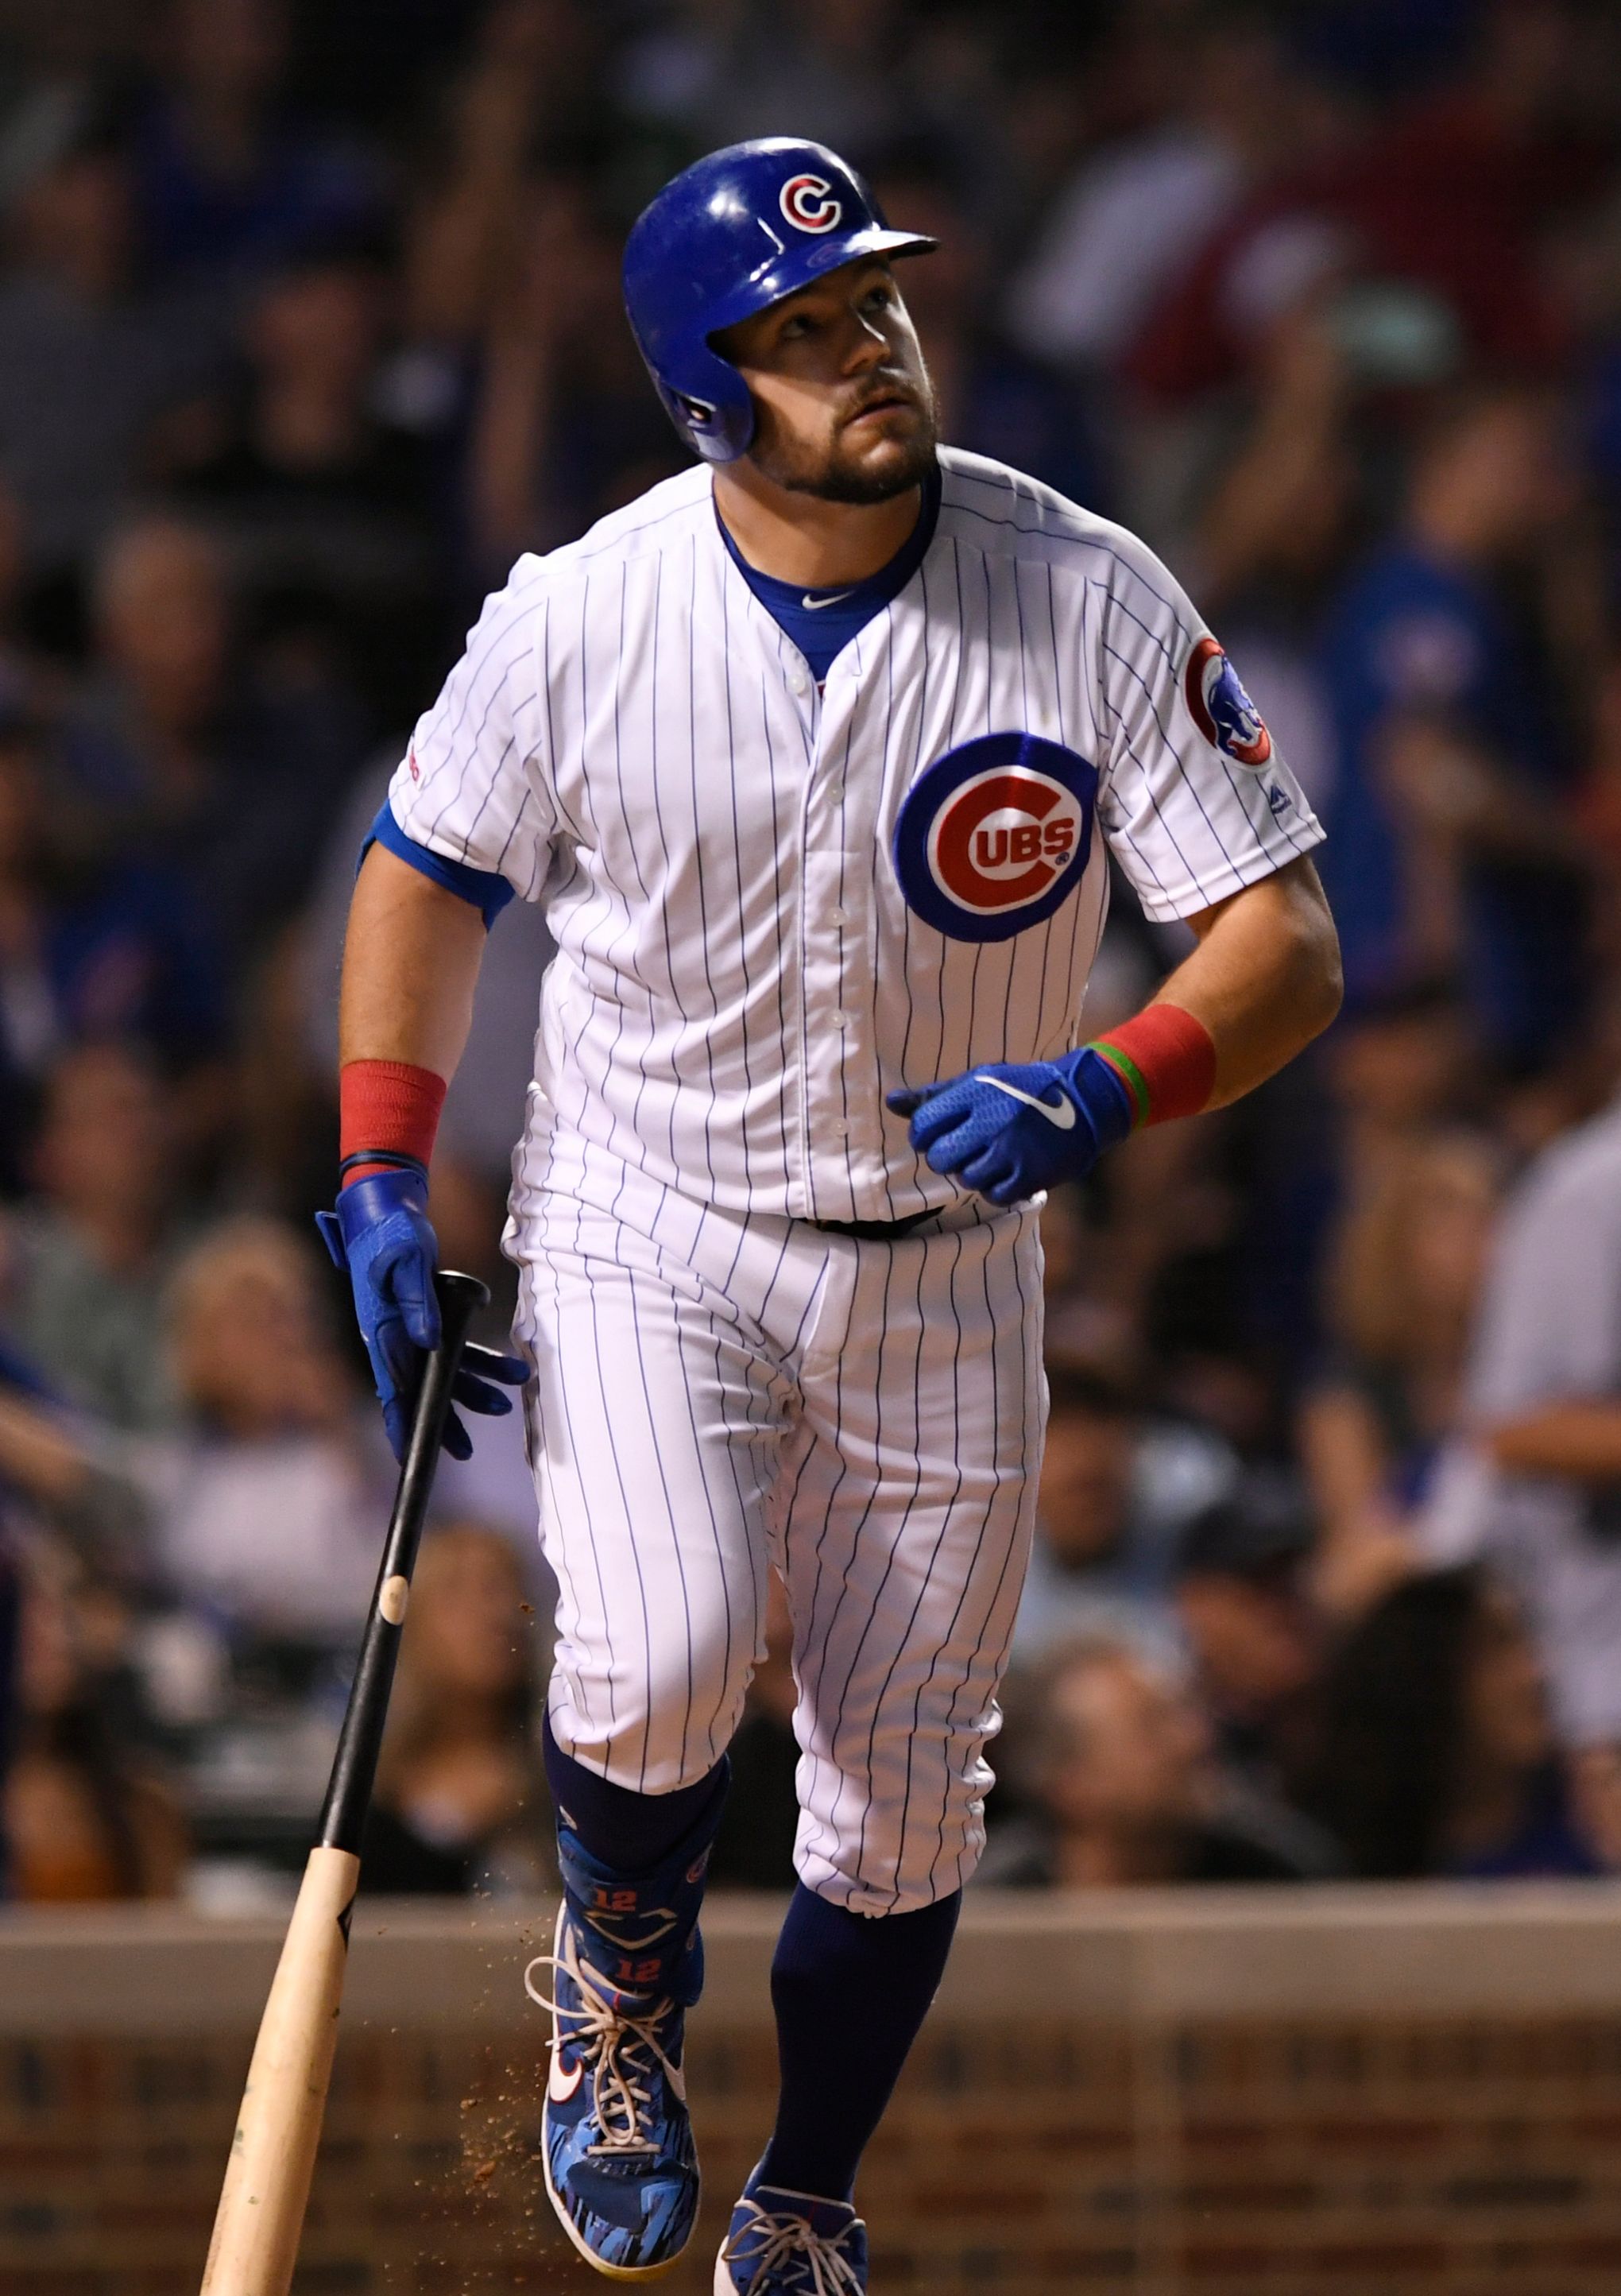 Kyle Schwarber's stint with Iowa Cubs comes to an end